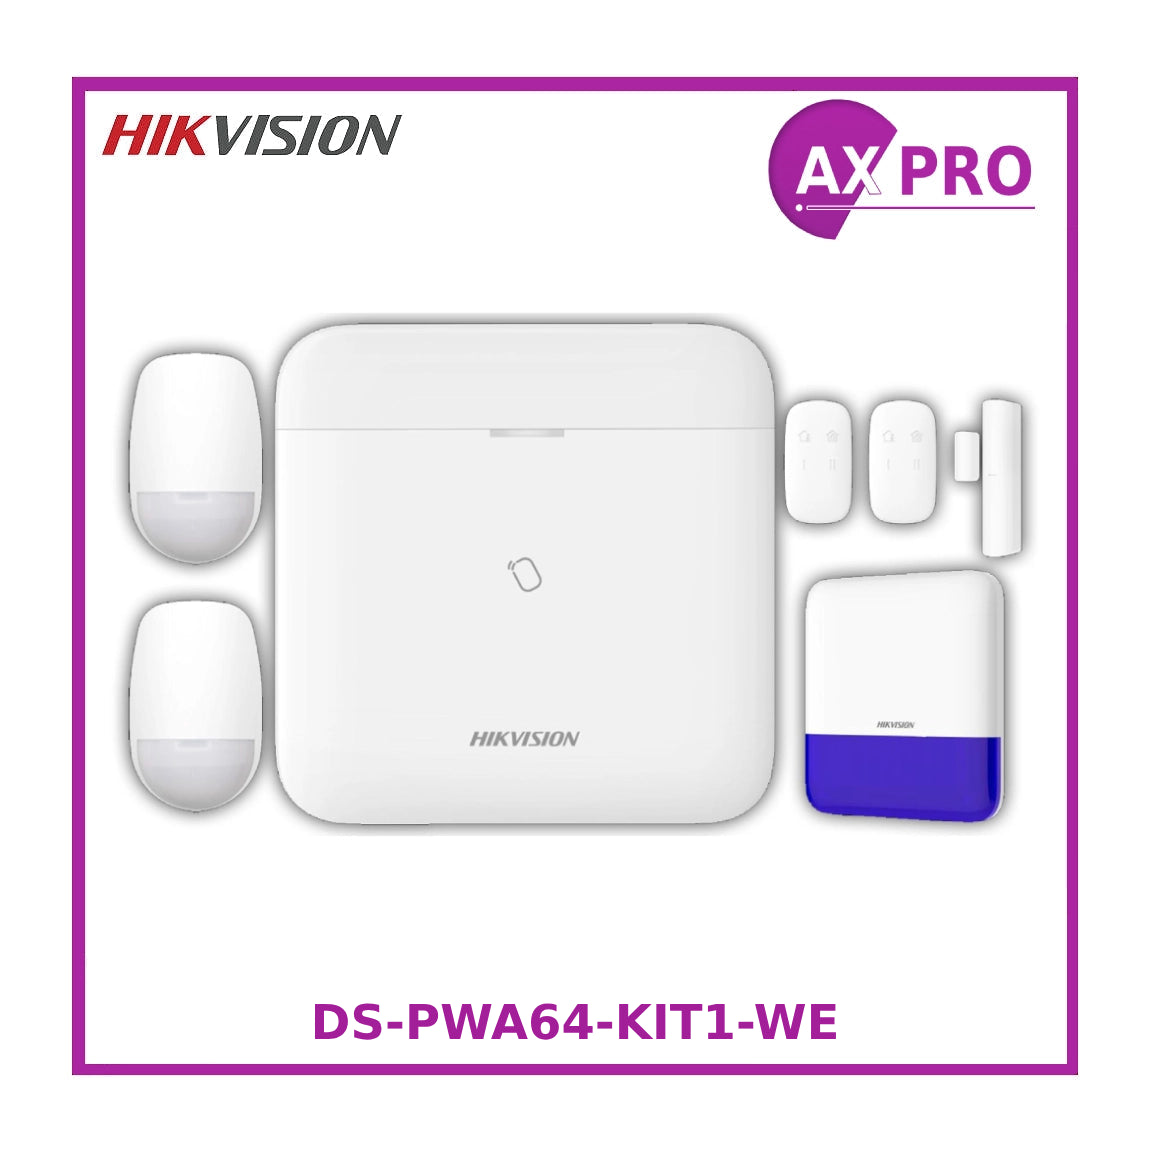 Hikvision AX PRO DS-PWA64-KIT1-WE Wireless Intruder Alarm Kit, up to 64 Wireless Zones/Outputs